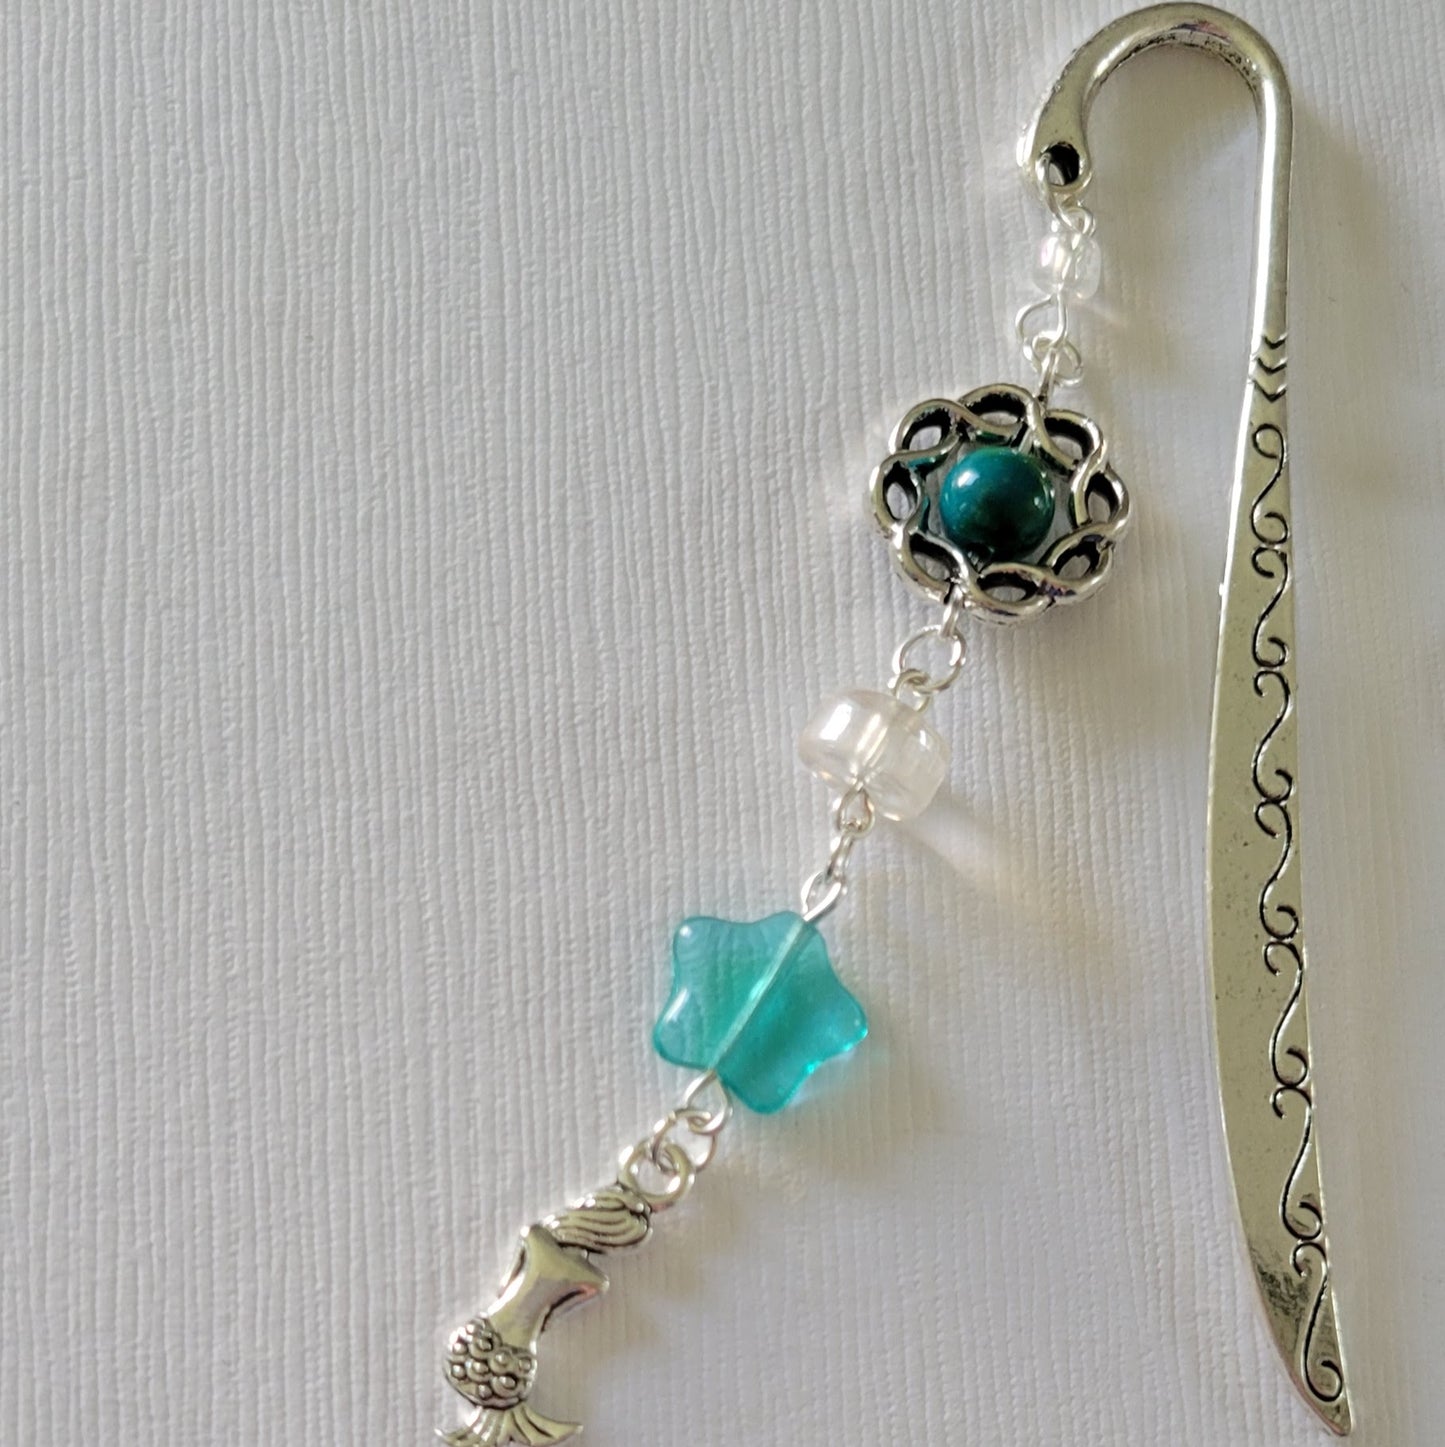 Silver bookmark with mermaid charm